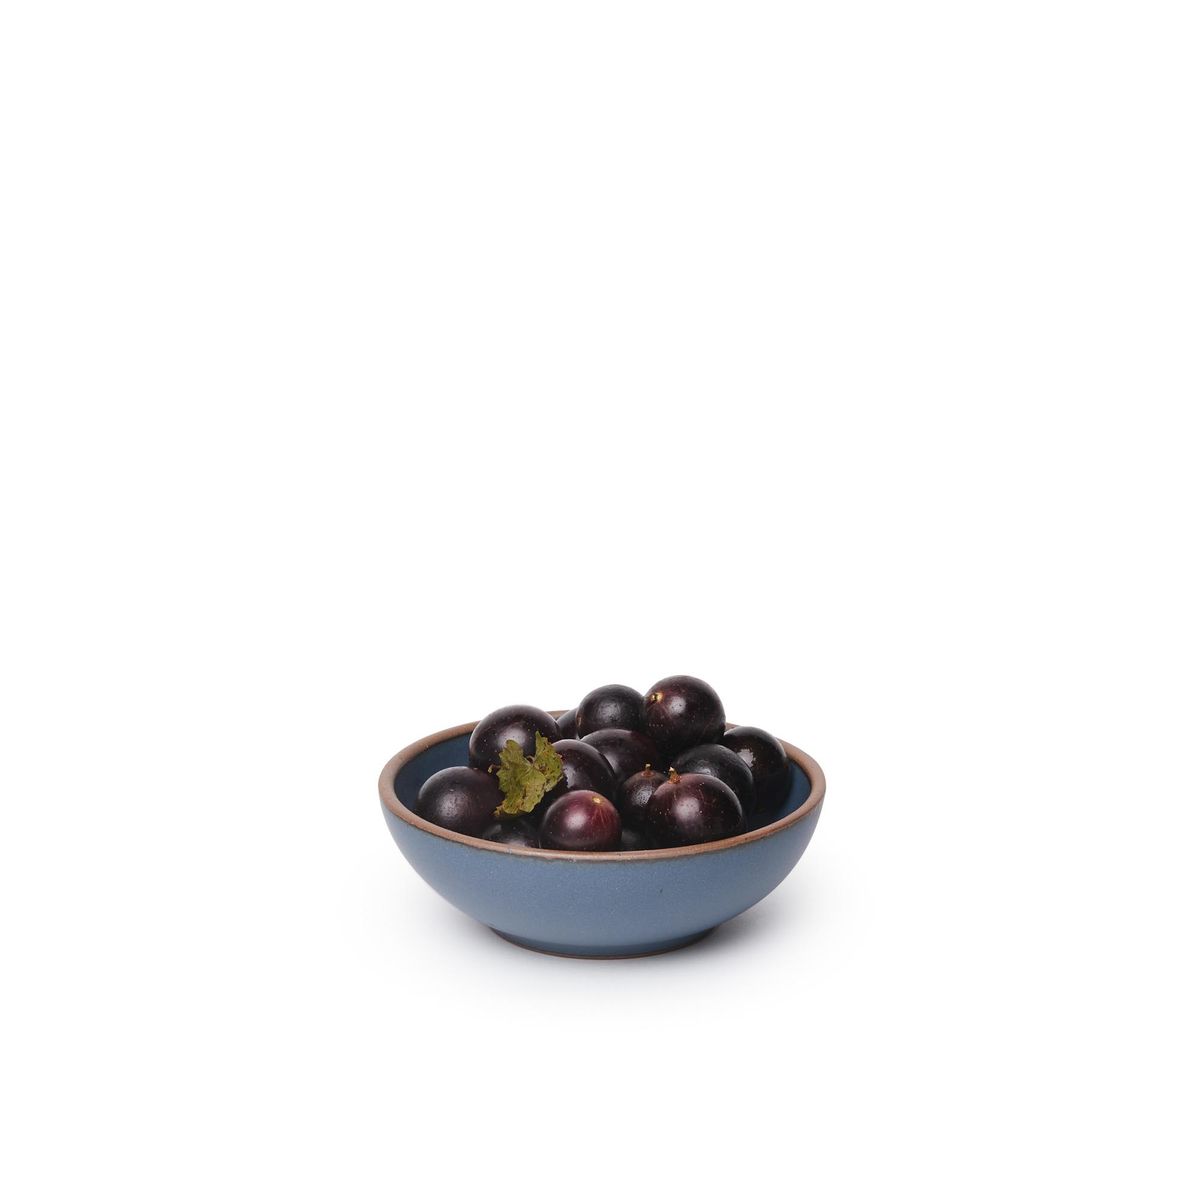 A small shallow ceramic bowl in a toned-down navy color featuring iron speckles and an unglazed rim, filled with cherries